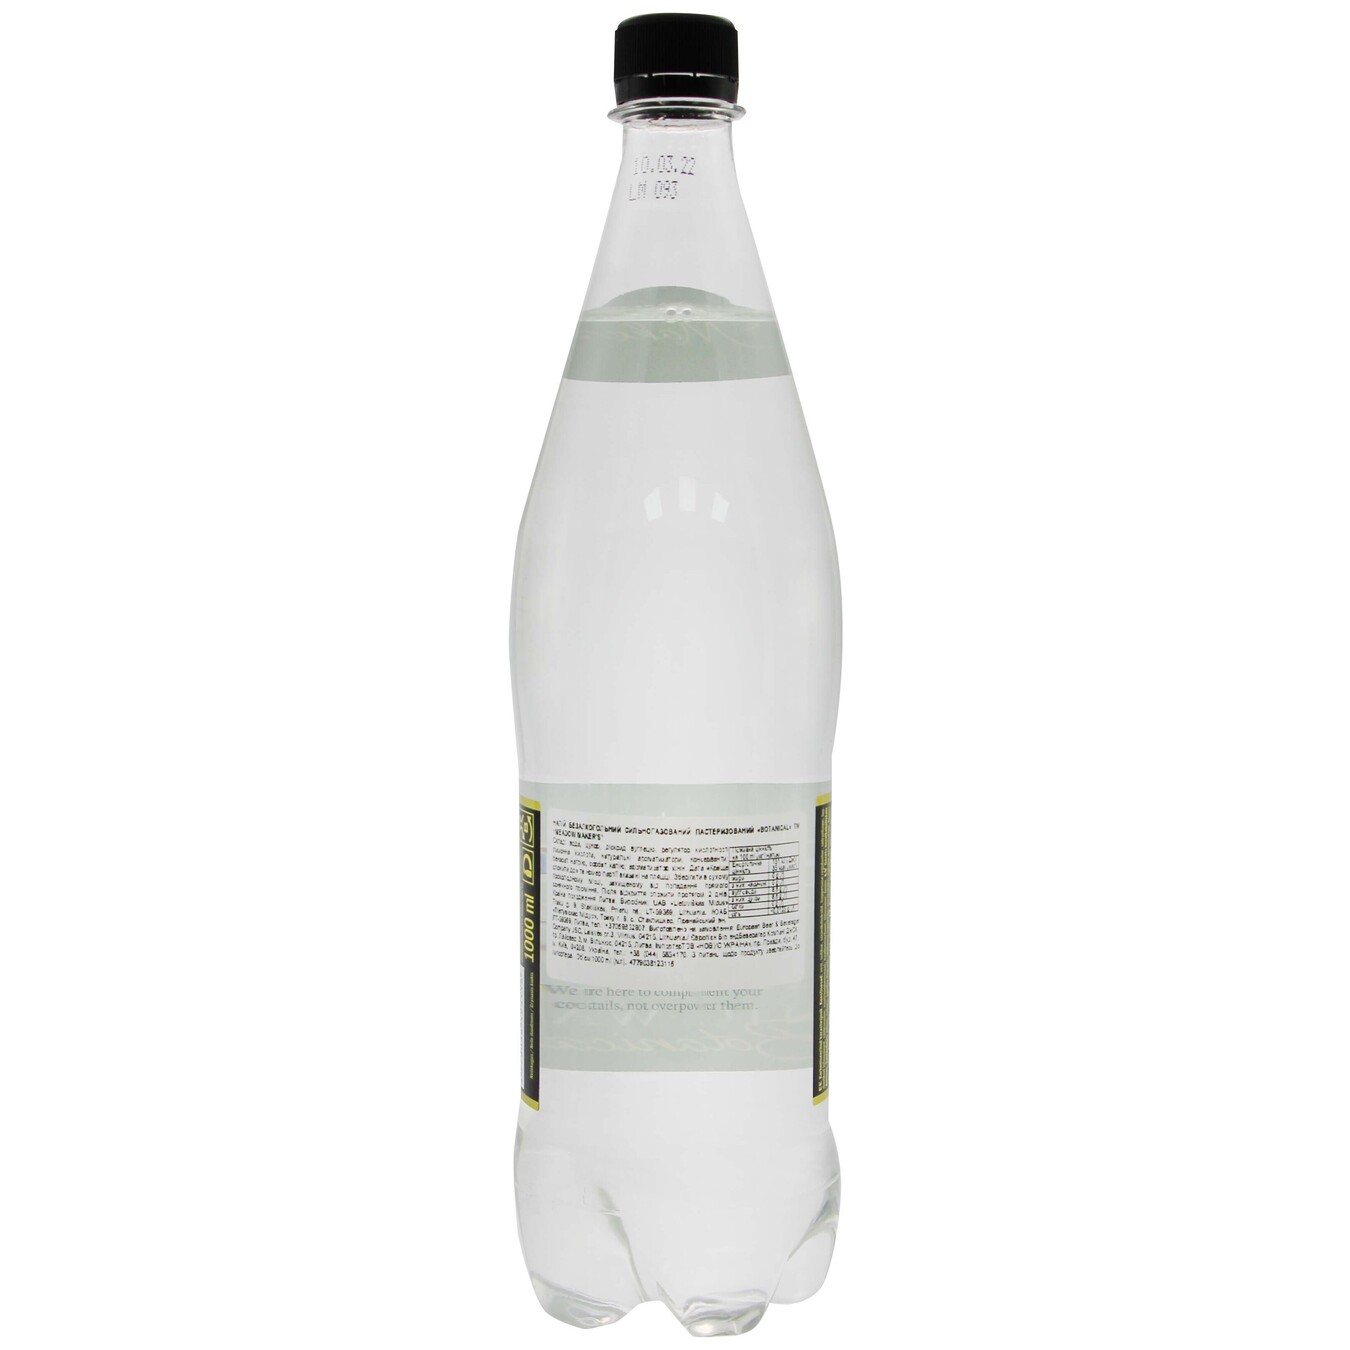 Meadow Makers Botanical Carbonated Drink 1l 2